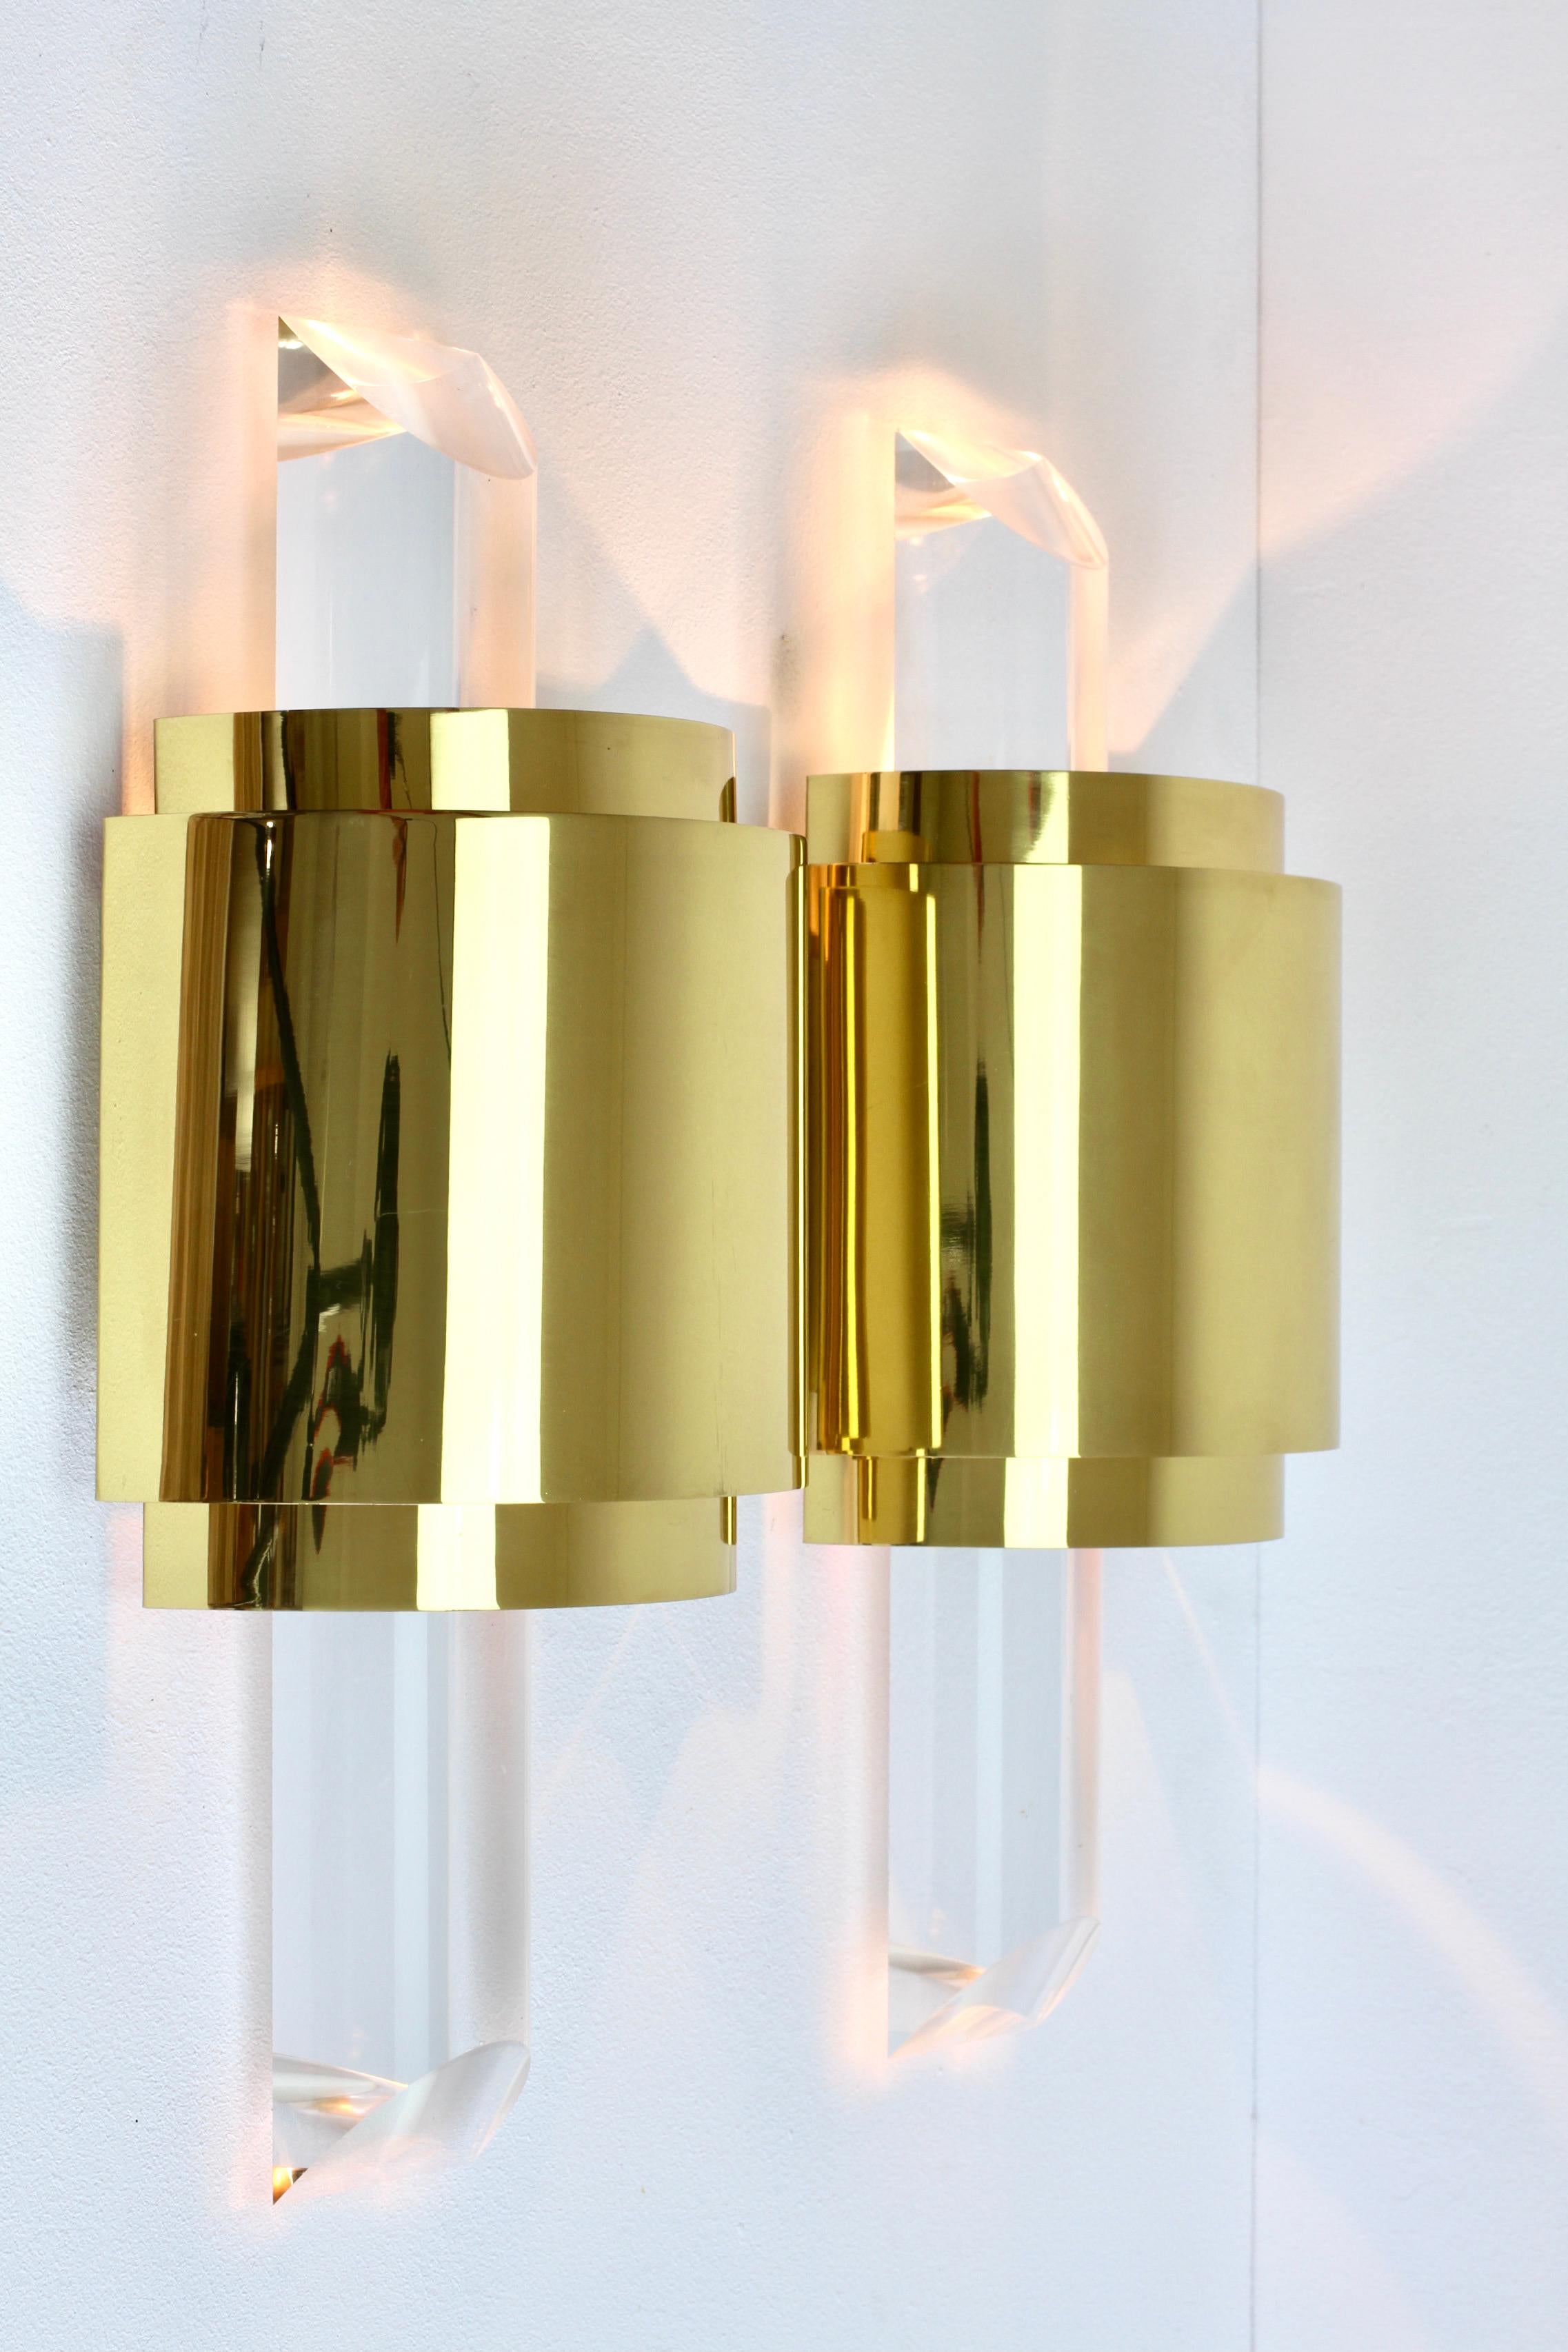 Large Hollywood Regency Lucite and Brass Wall Lights or Sconces, circa 1970s For Sale 6